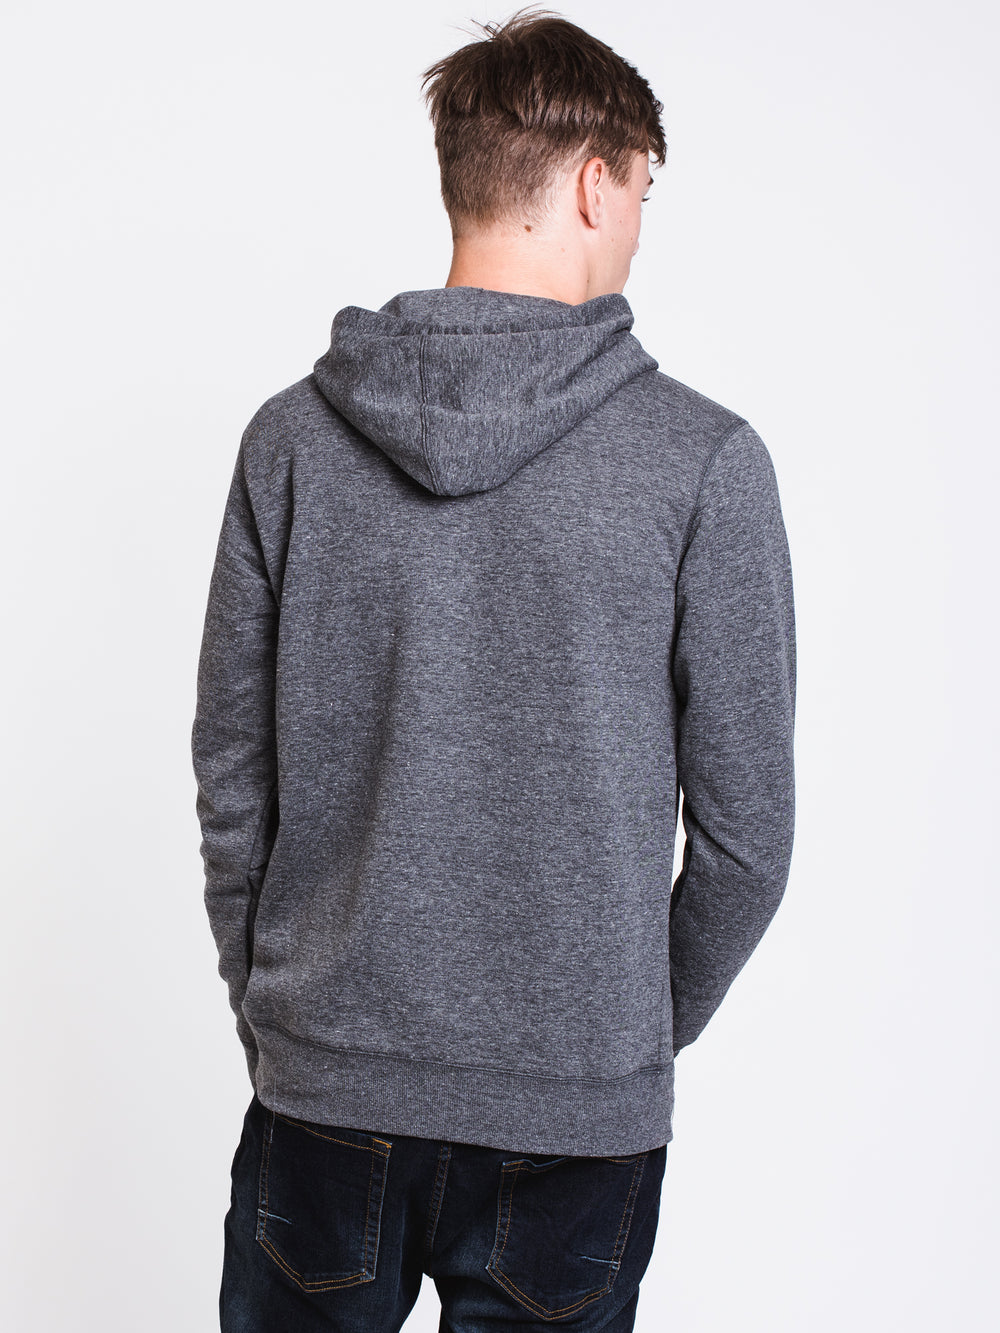 MENS ALL DAY PULLOVER HOODIE - BLACK - CLEARANCE